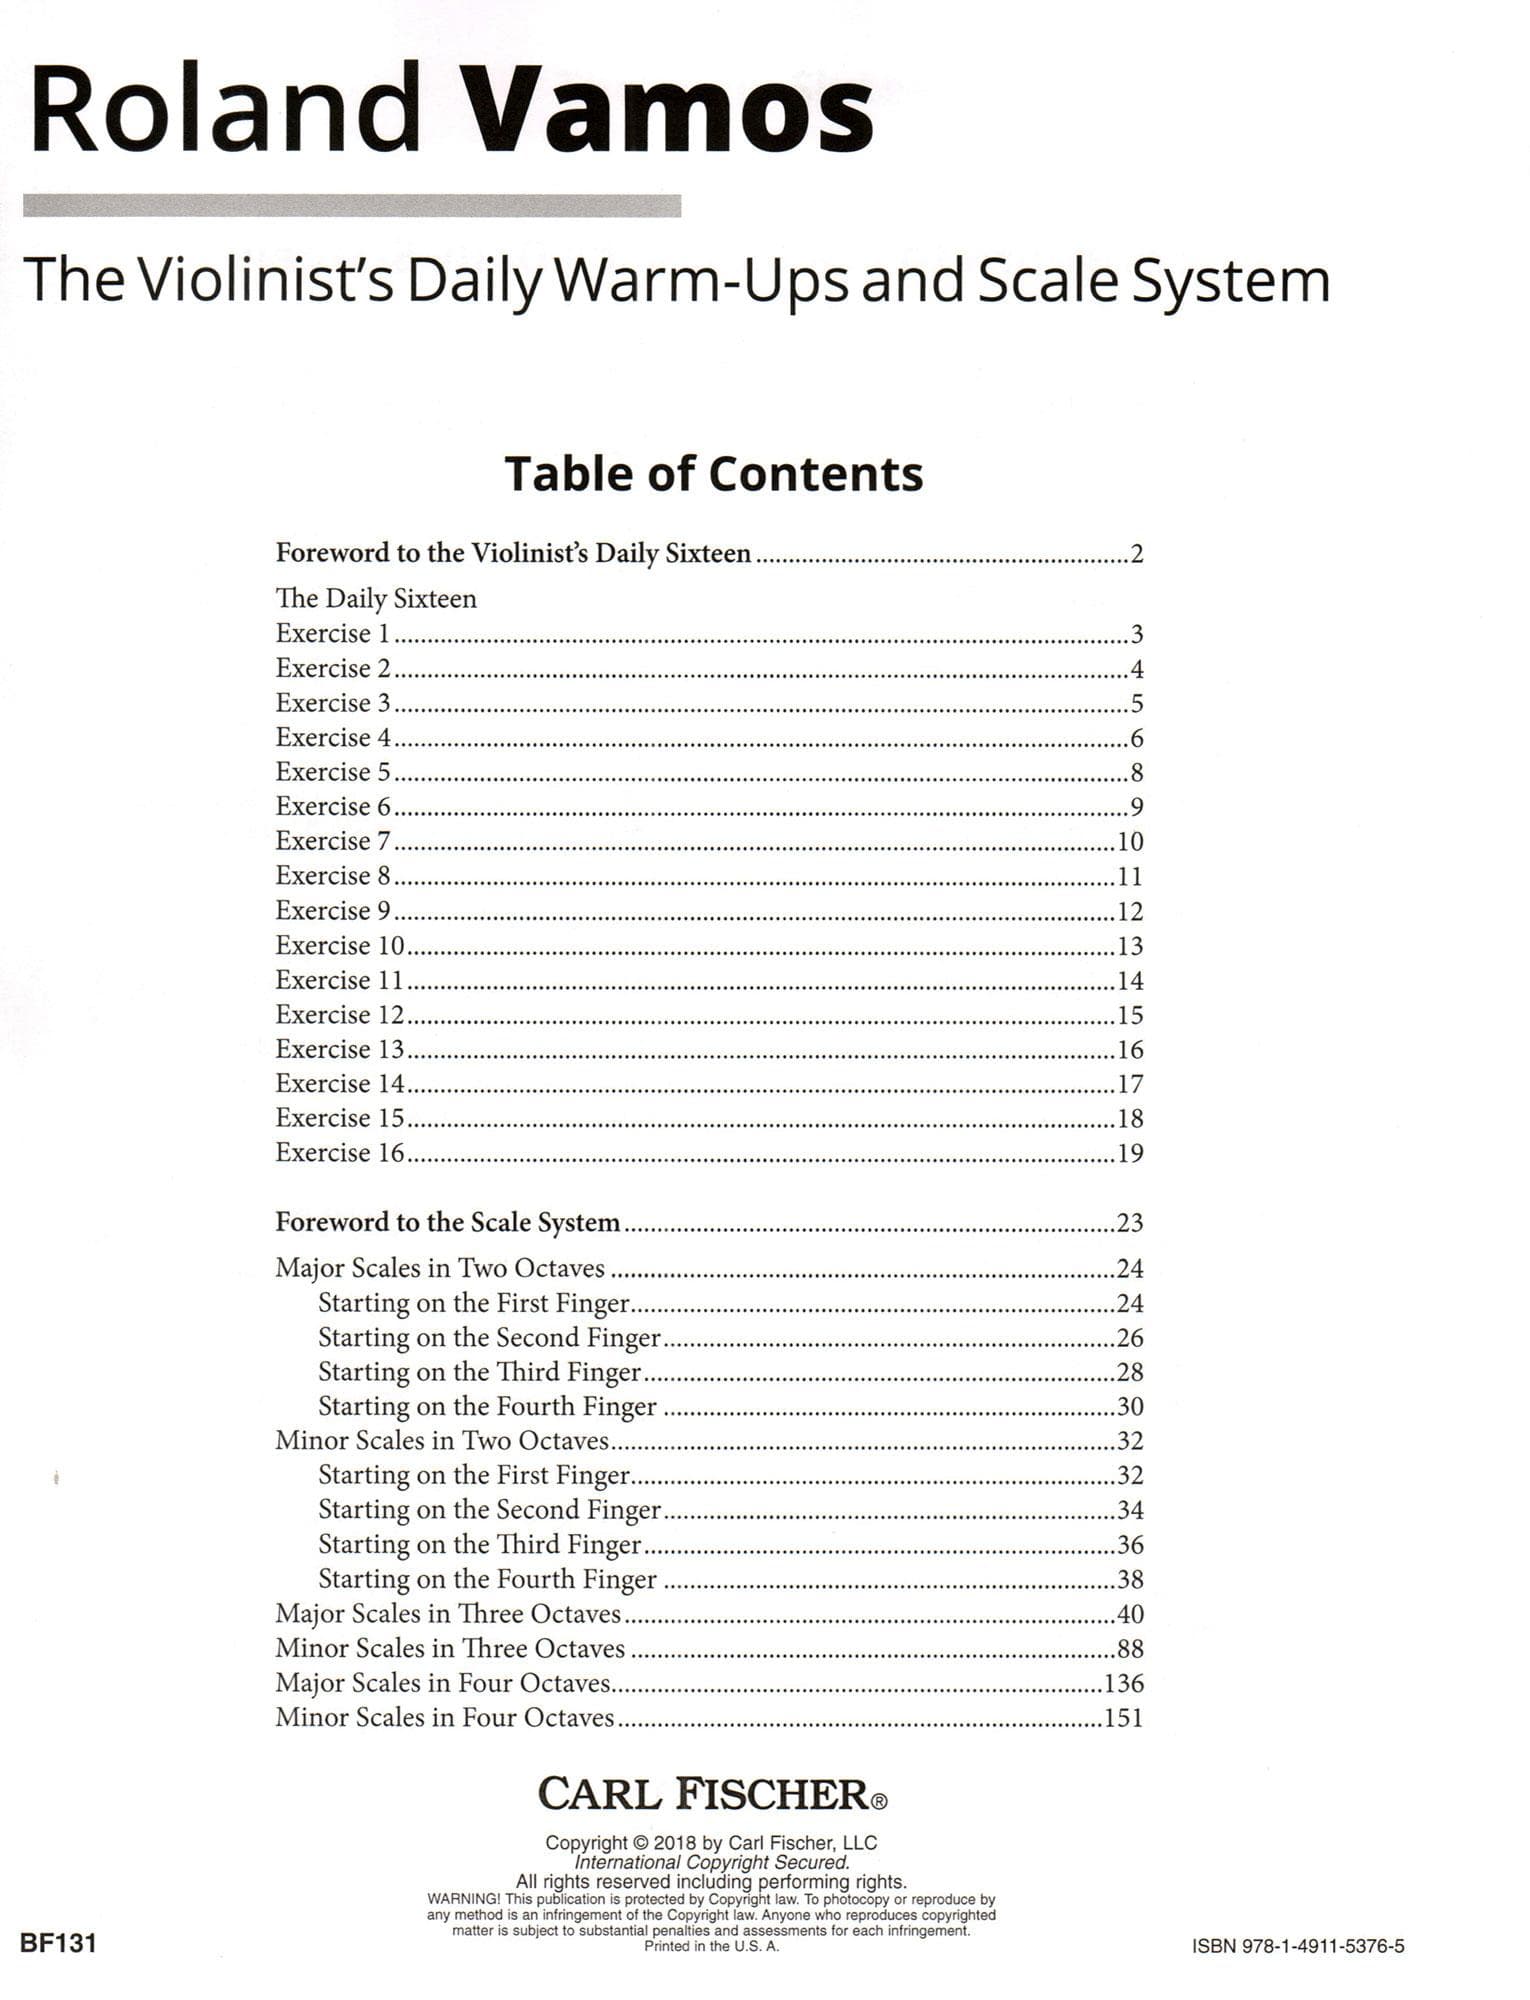 Vamos, Roland - The Violinist's Daily Warm Ups and Scale System - Carl Fischer